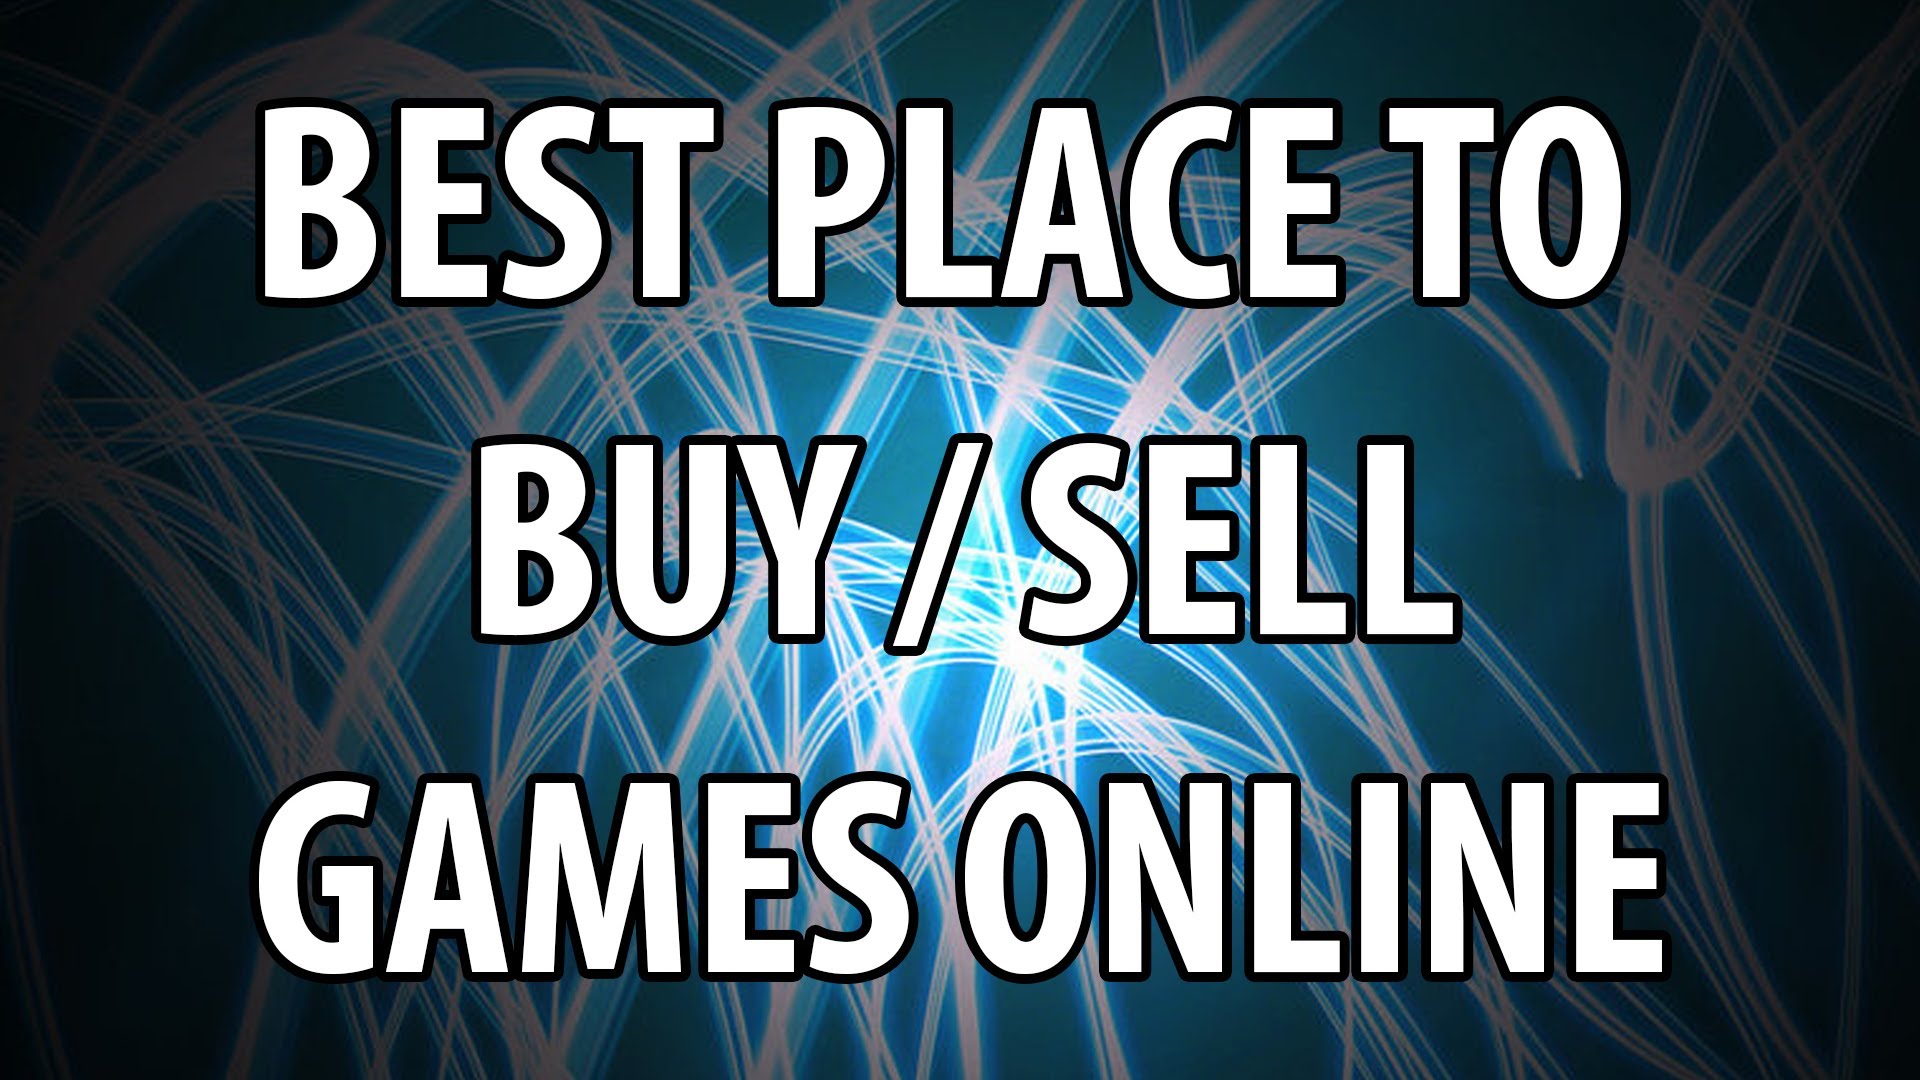 The Best Place To Buy And Sell Games Online